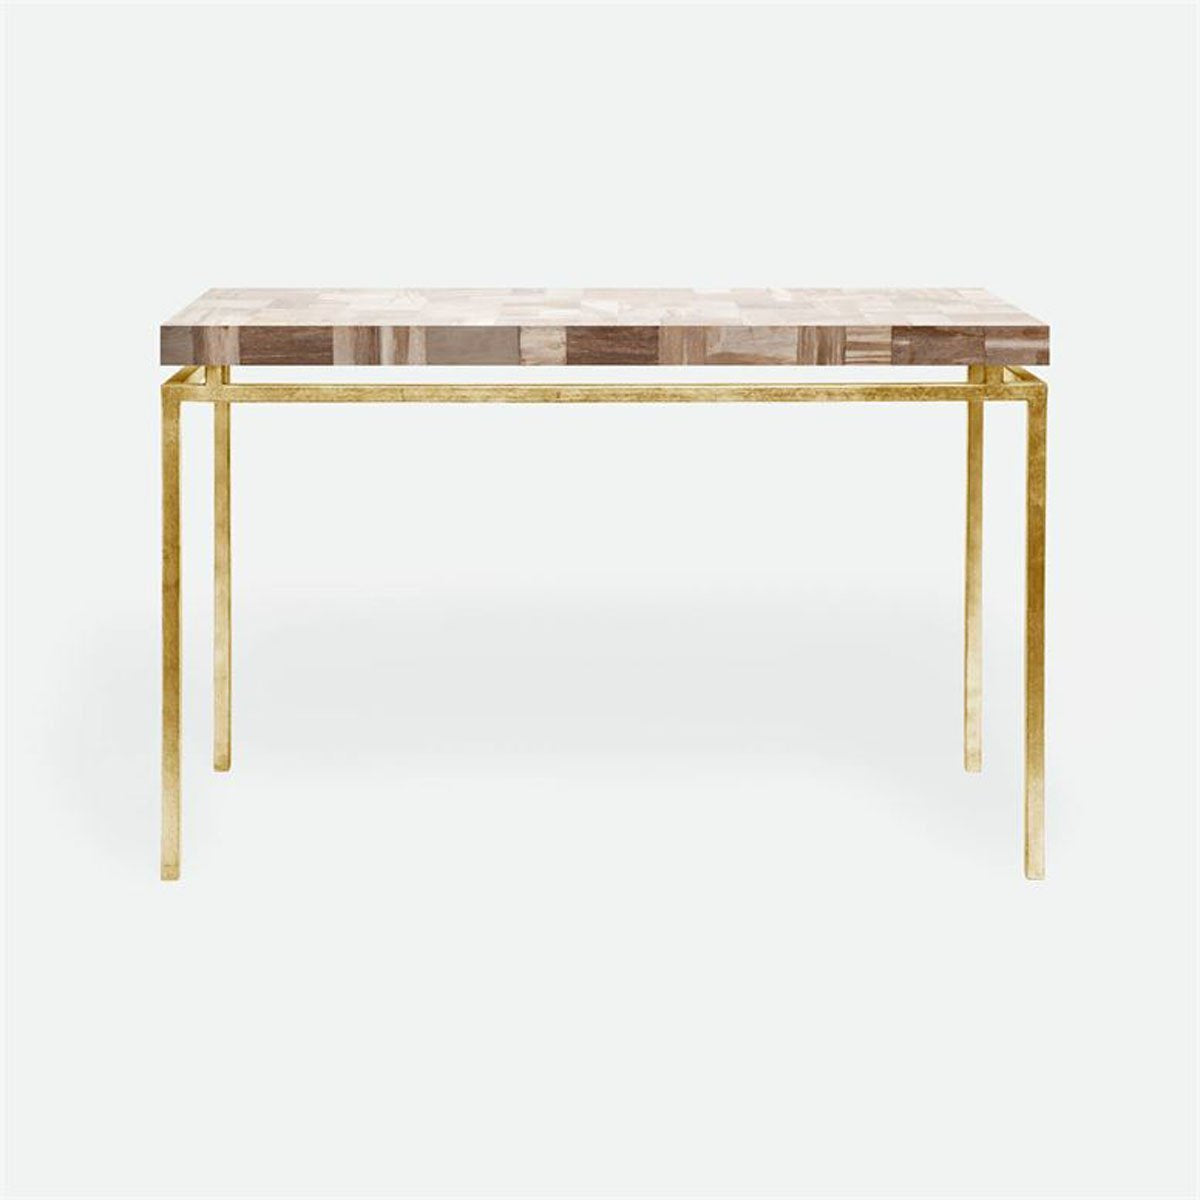 Made Goods Benjamin Floating Leg Console Table in Petrified Wood Top